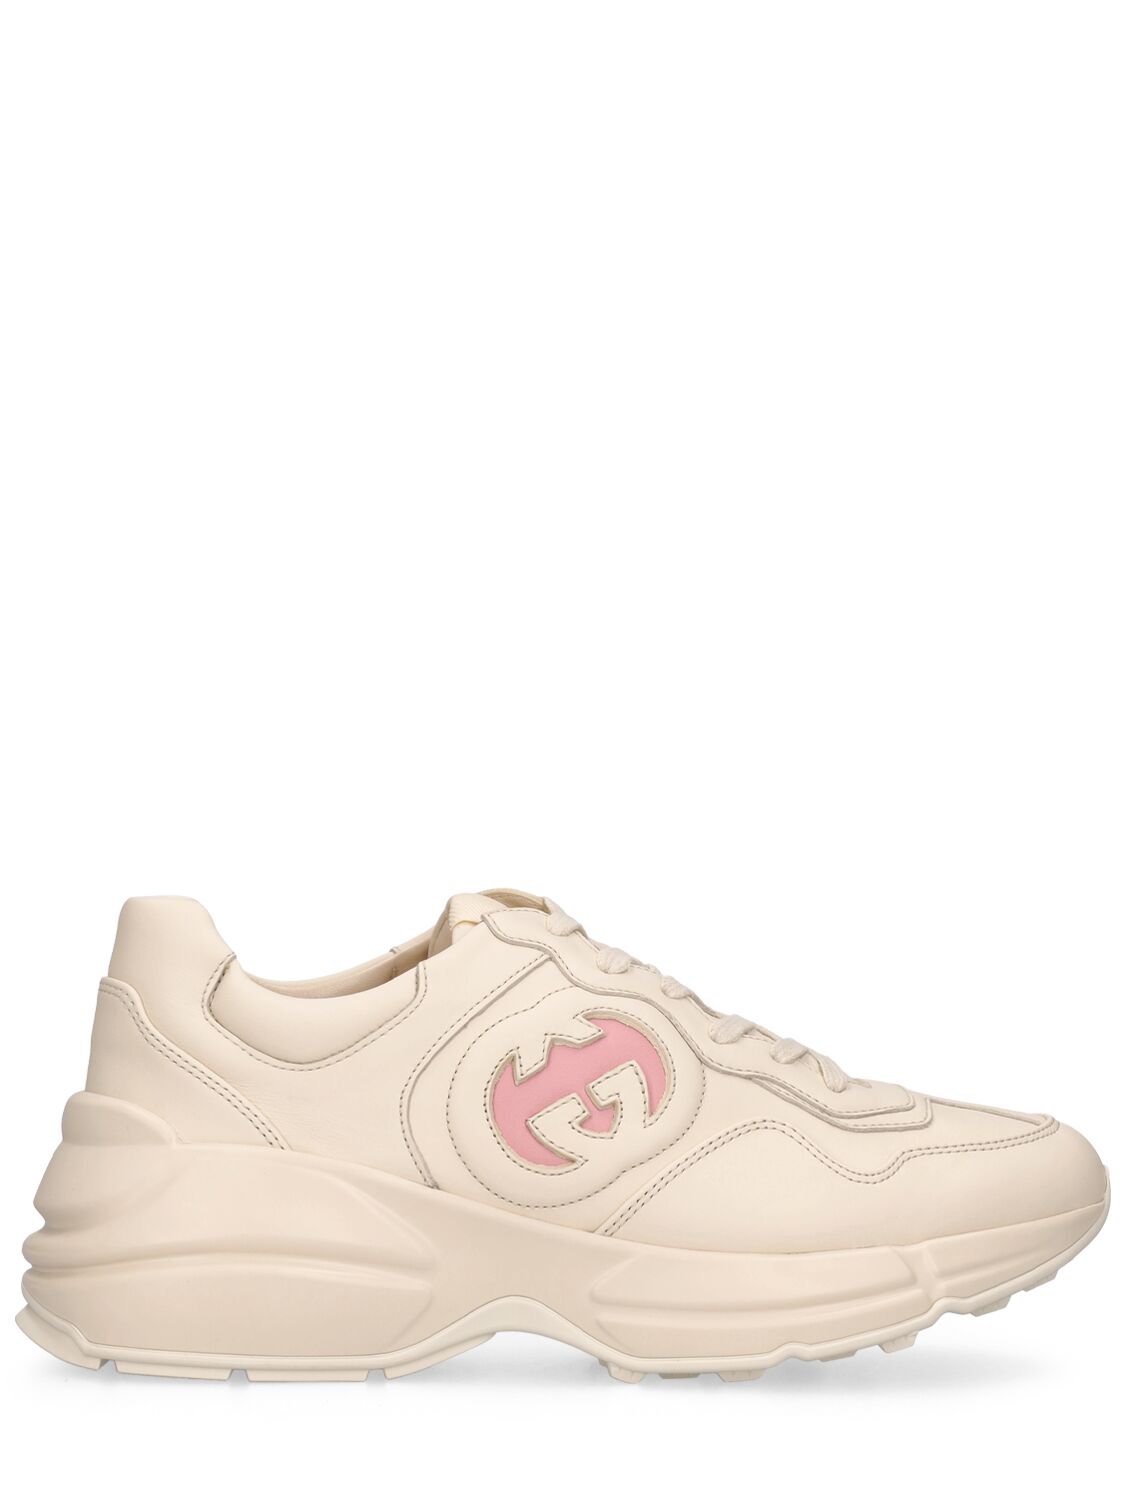 GUCCI 72mm Rhyton Leather Sneakers